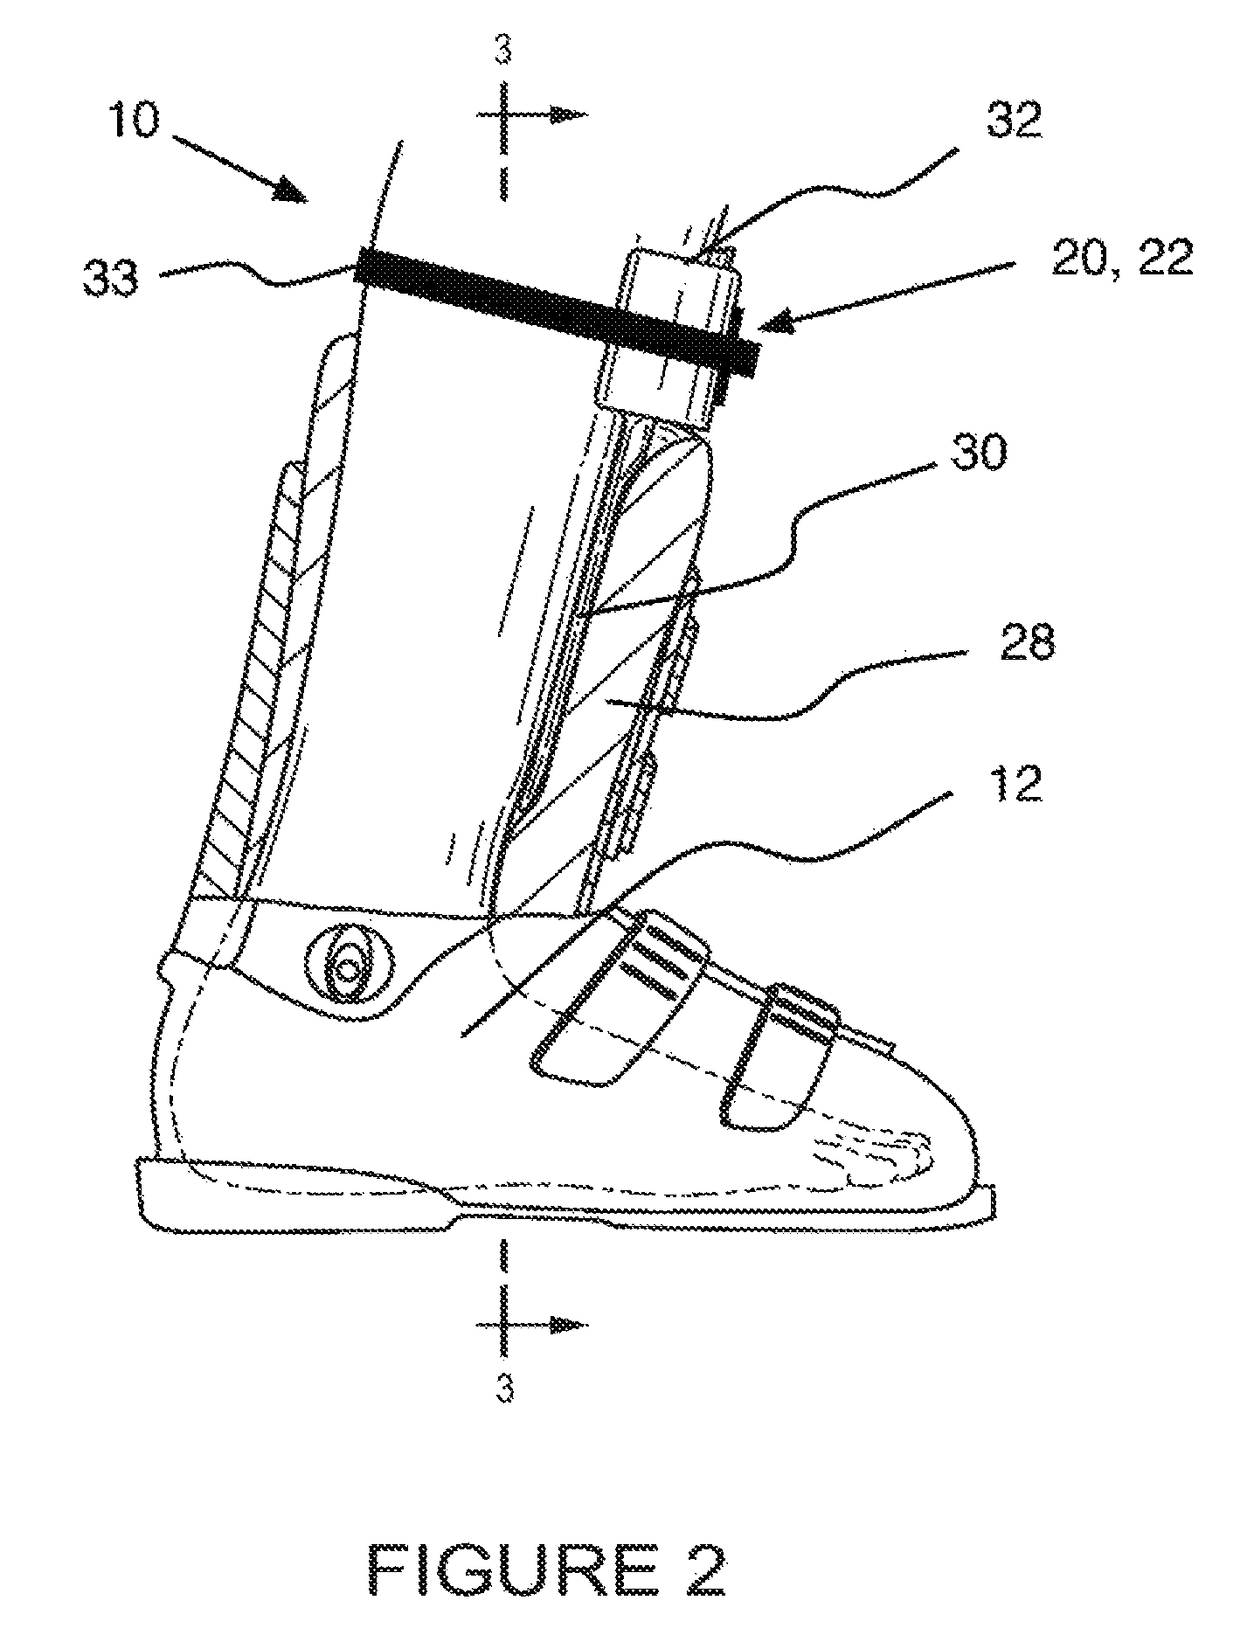 Sport-boot pressure monitor and method of use